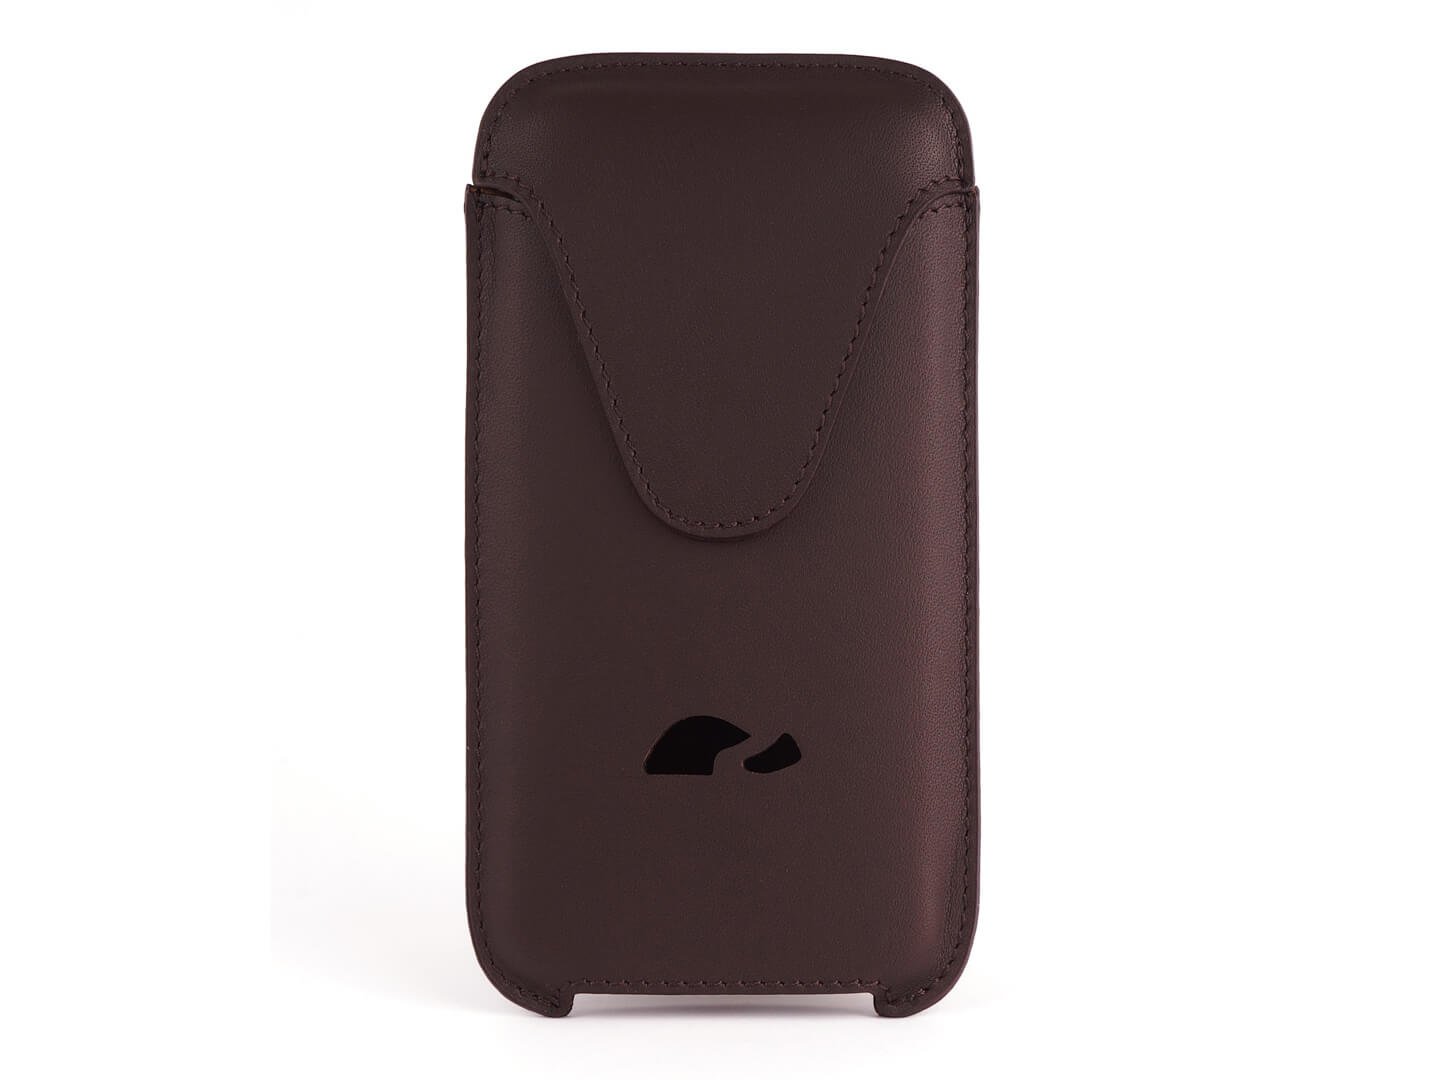 iPhone 6 / 7 / 8 / Sleeve Case Leather slim - brown - Carapaz